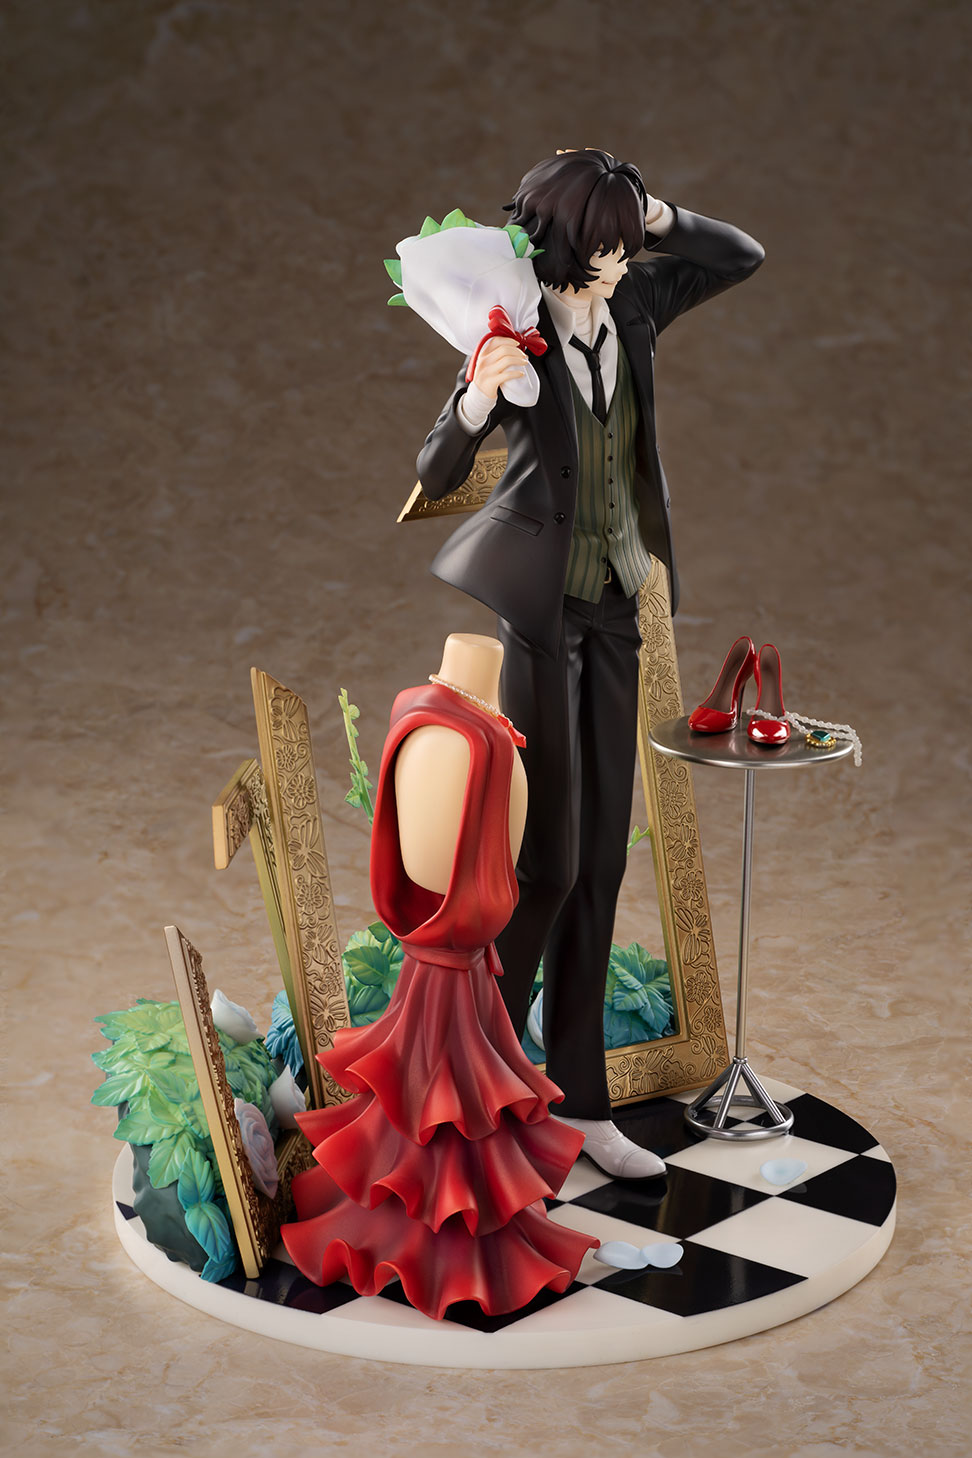 QAHEART Dazai Osamu Figures Anime Figure Statues Jacket is Removable and  Arms are Replaceable Anime Figurine